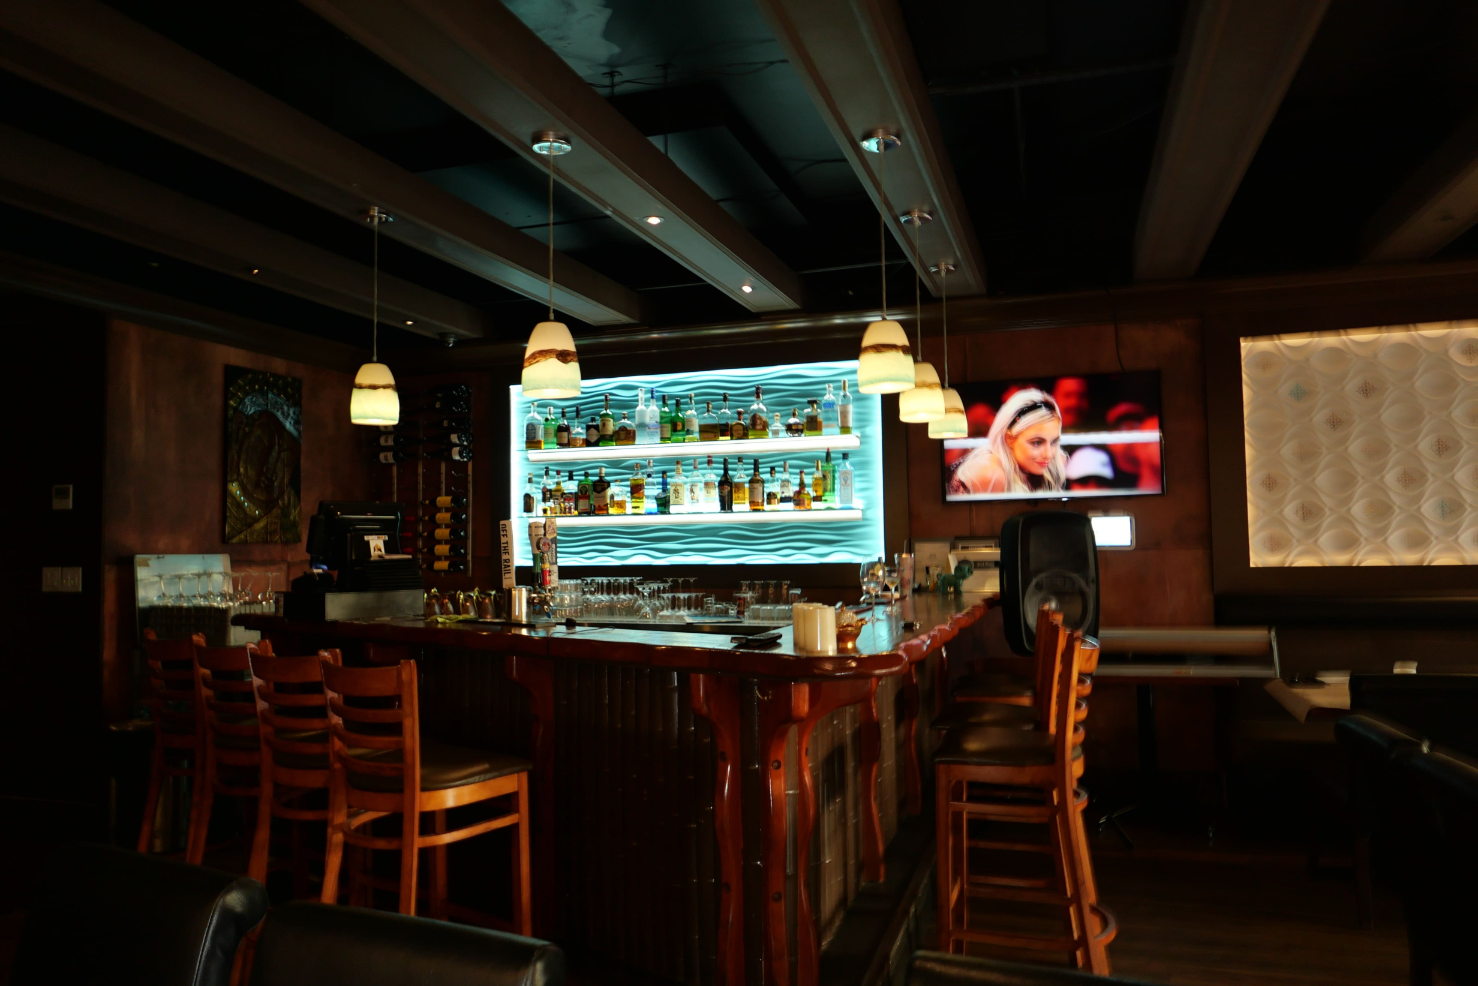 Bombay's bar with a backlit shelf containing alcohol surrounded by a square shaped countertop with wooden barstools.